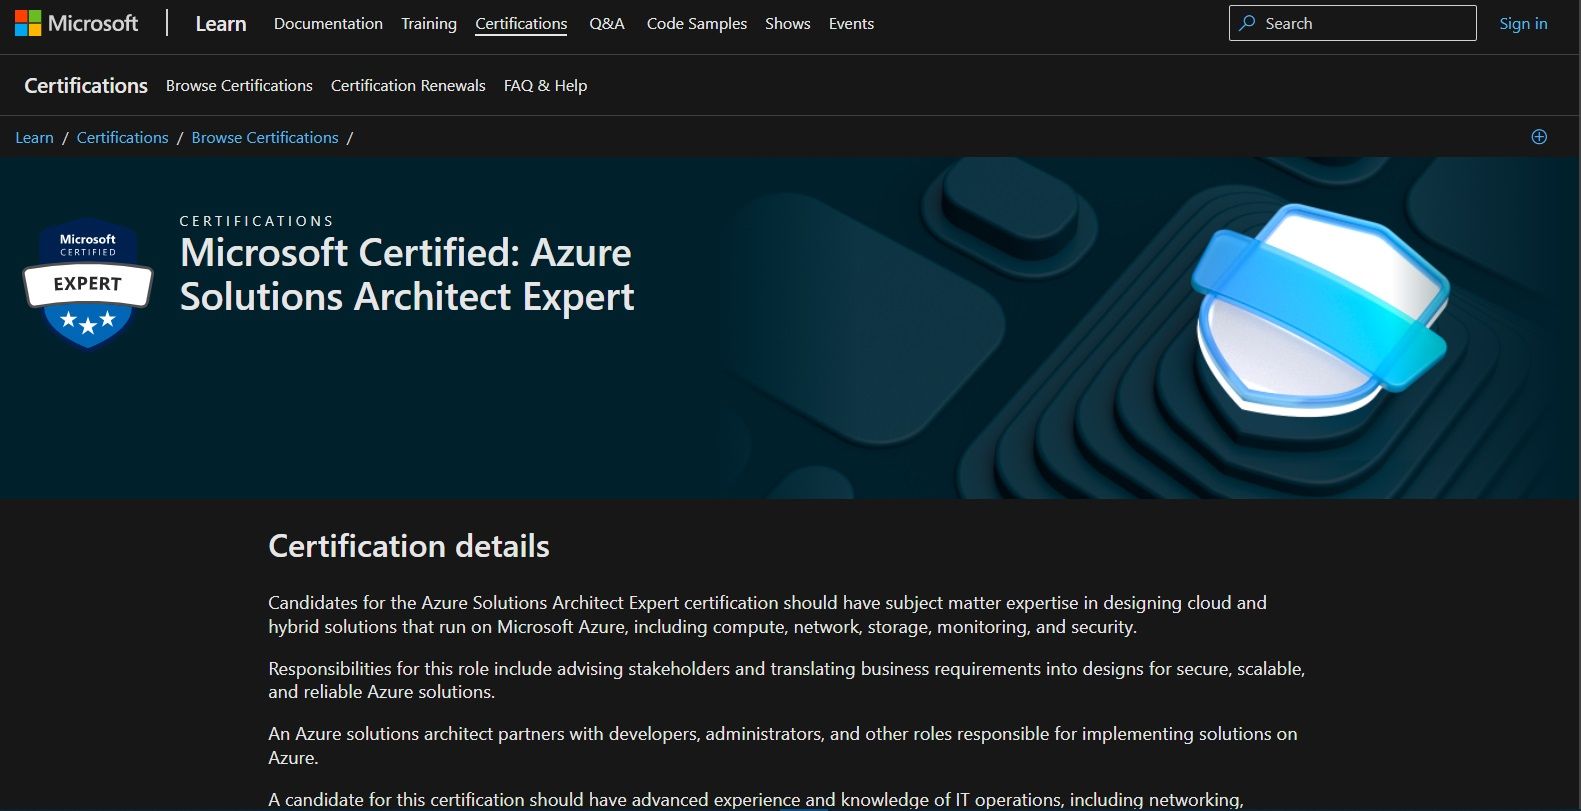 An image showing the Microsoft Azure website homepage